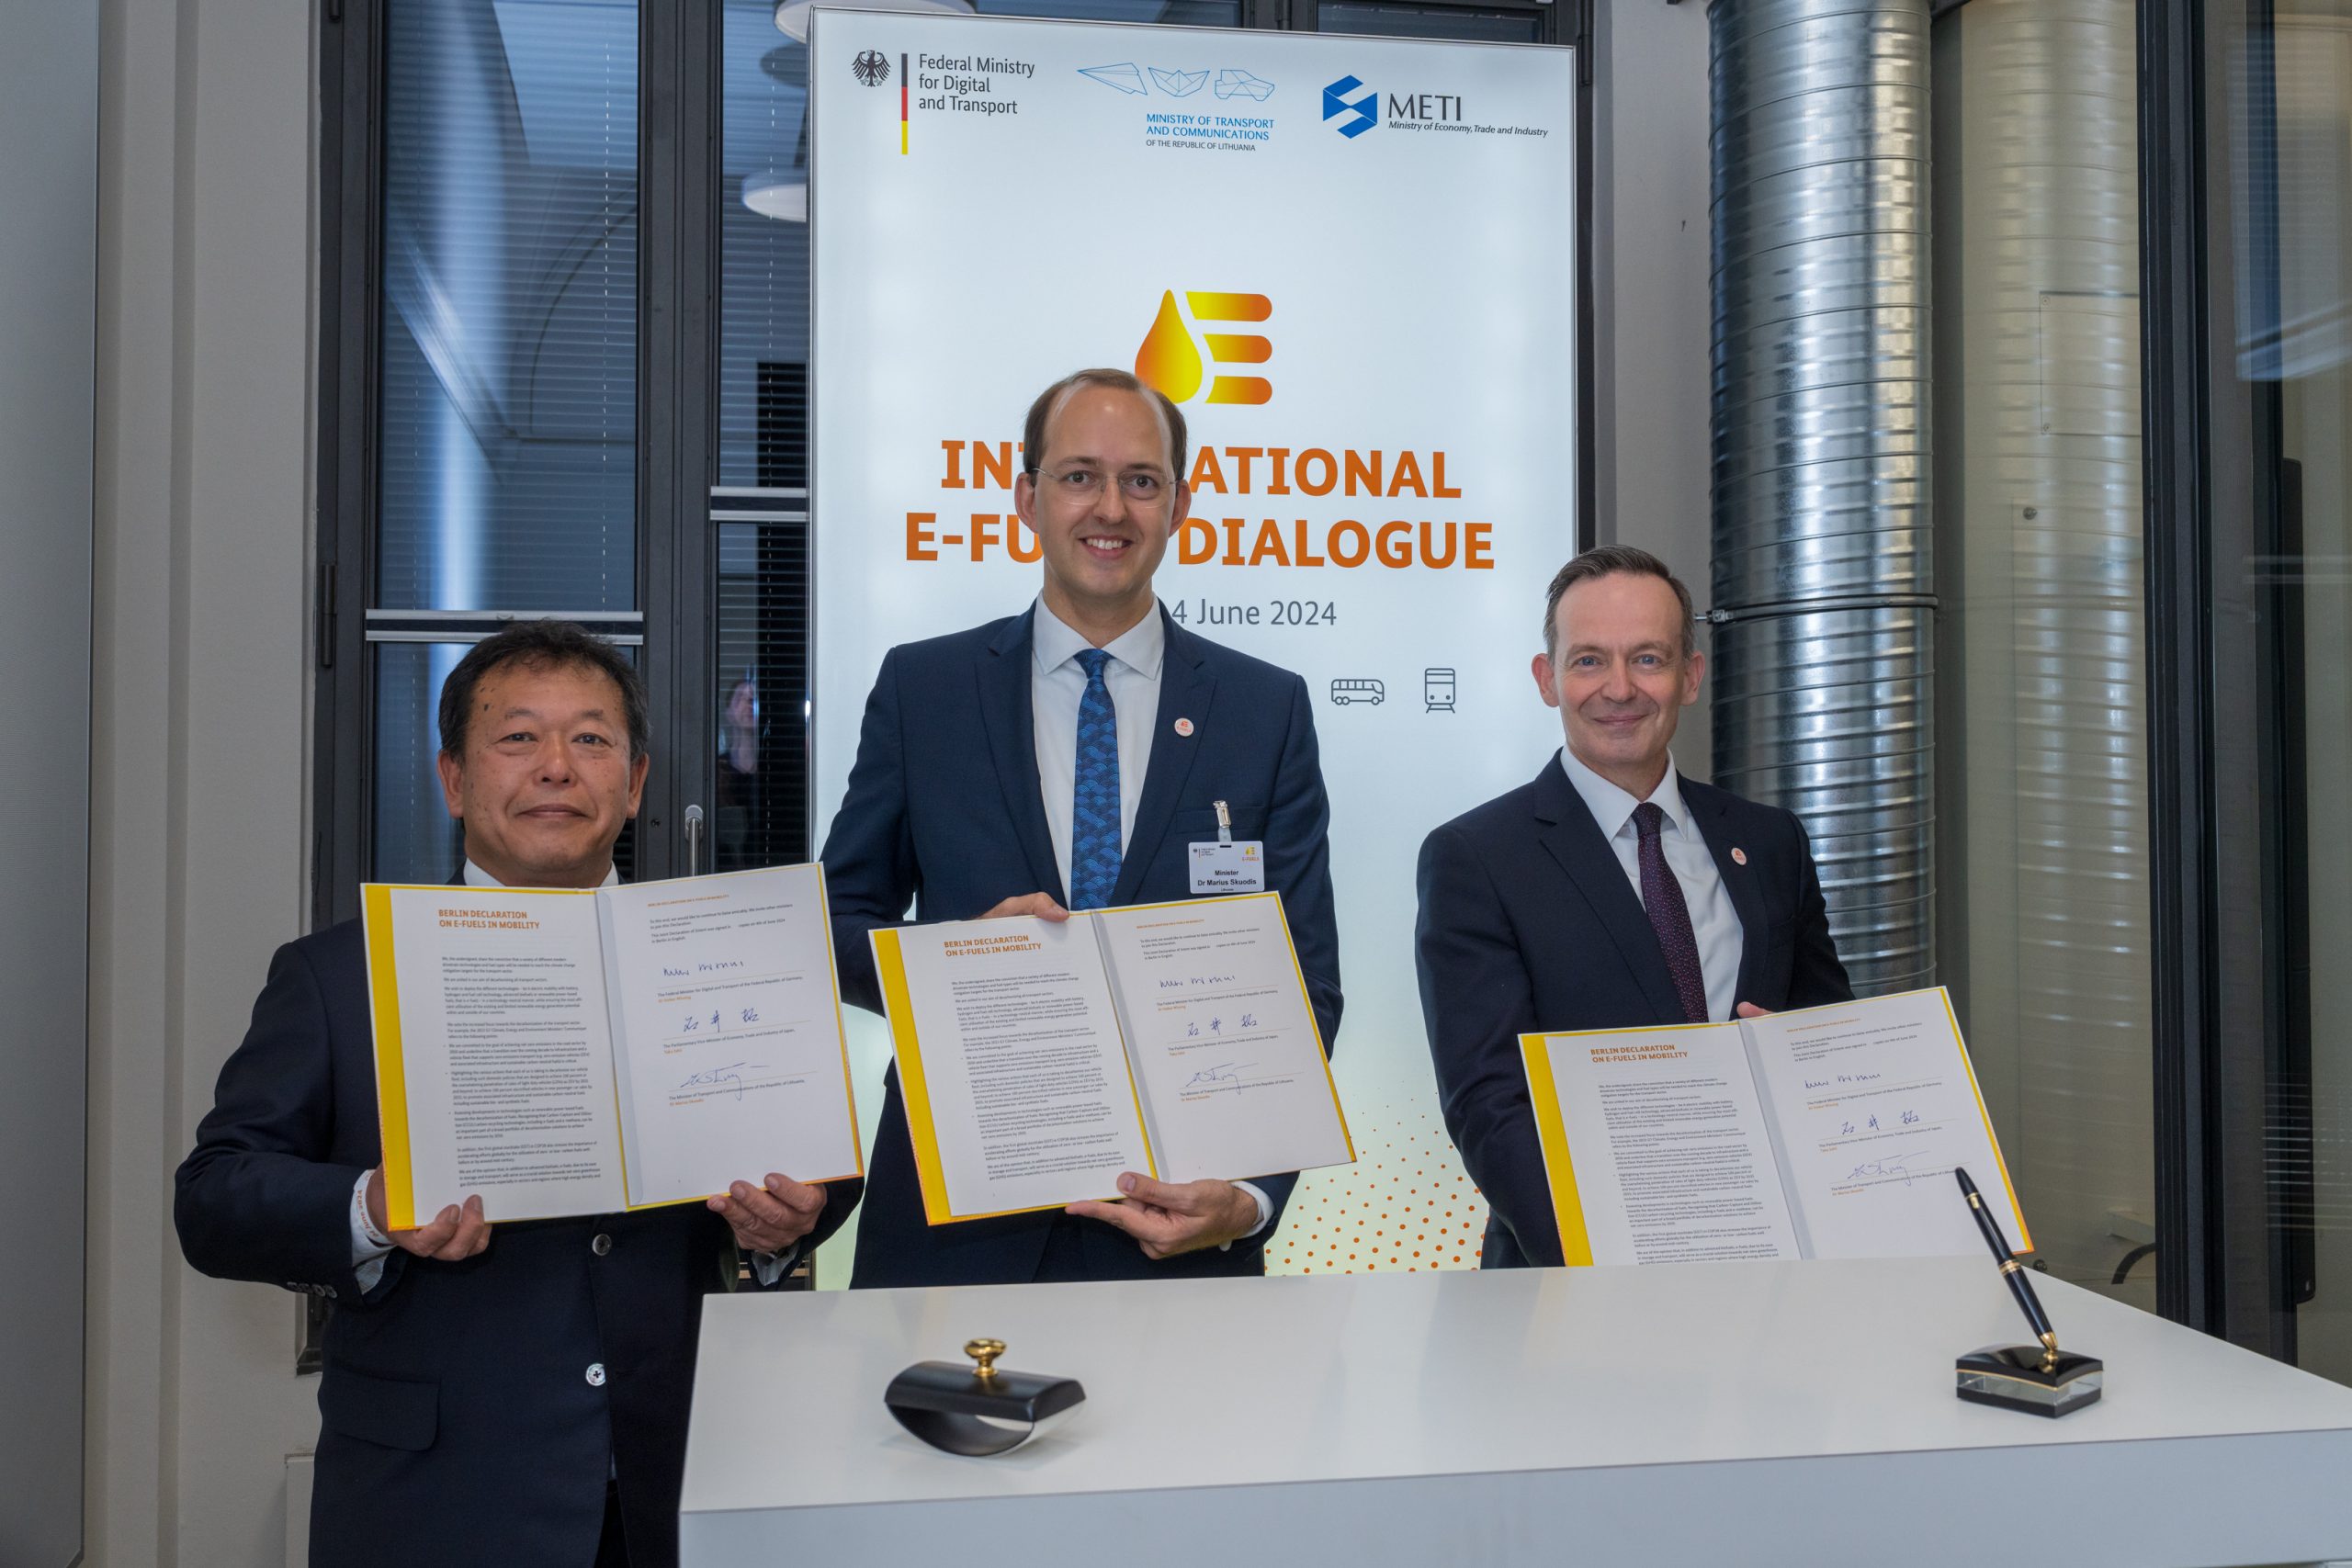 Lithuania, Germany and Japan Agree to Use of e-fuels in Transport